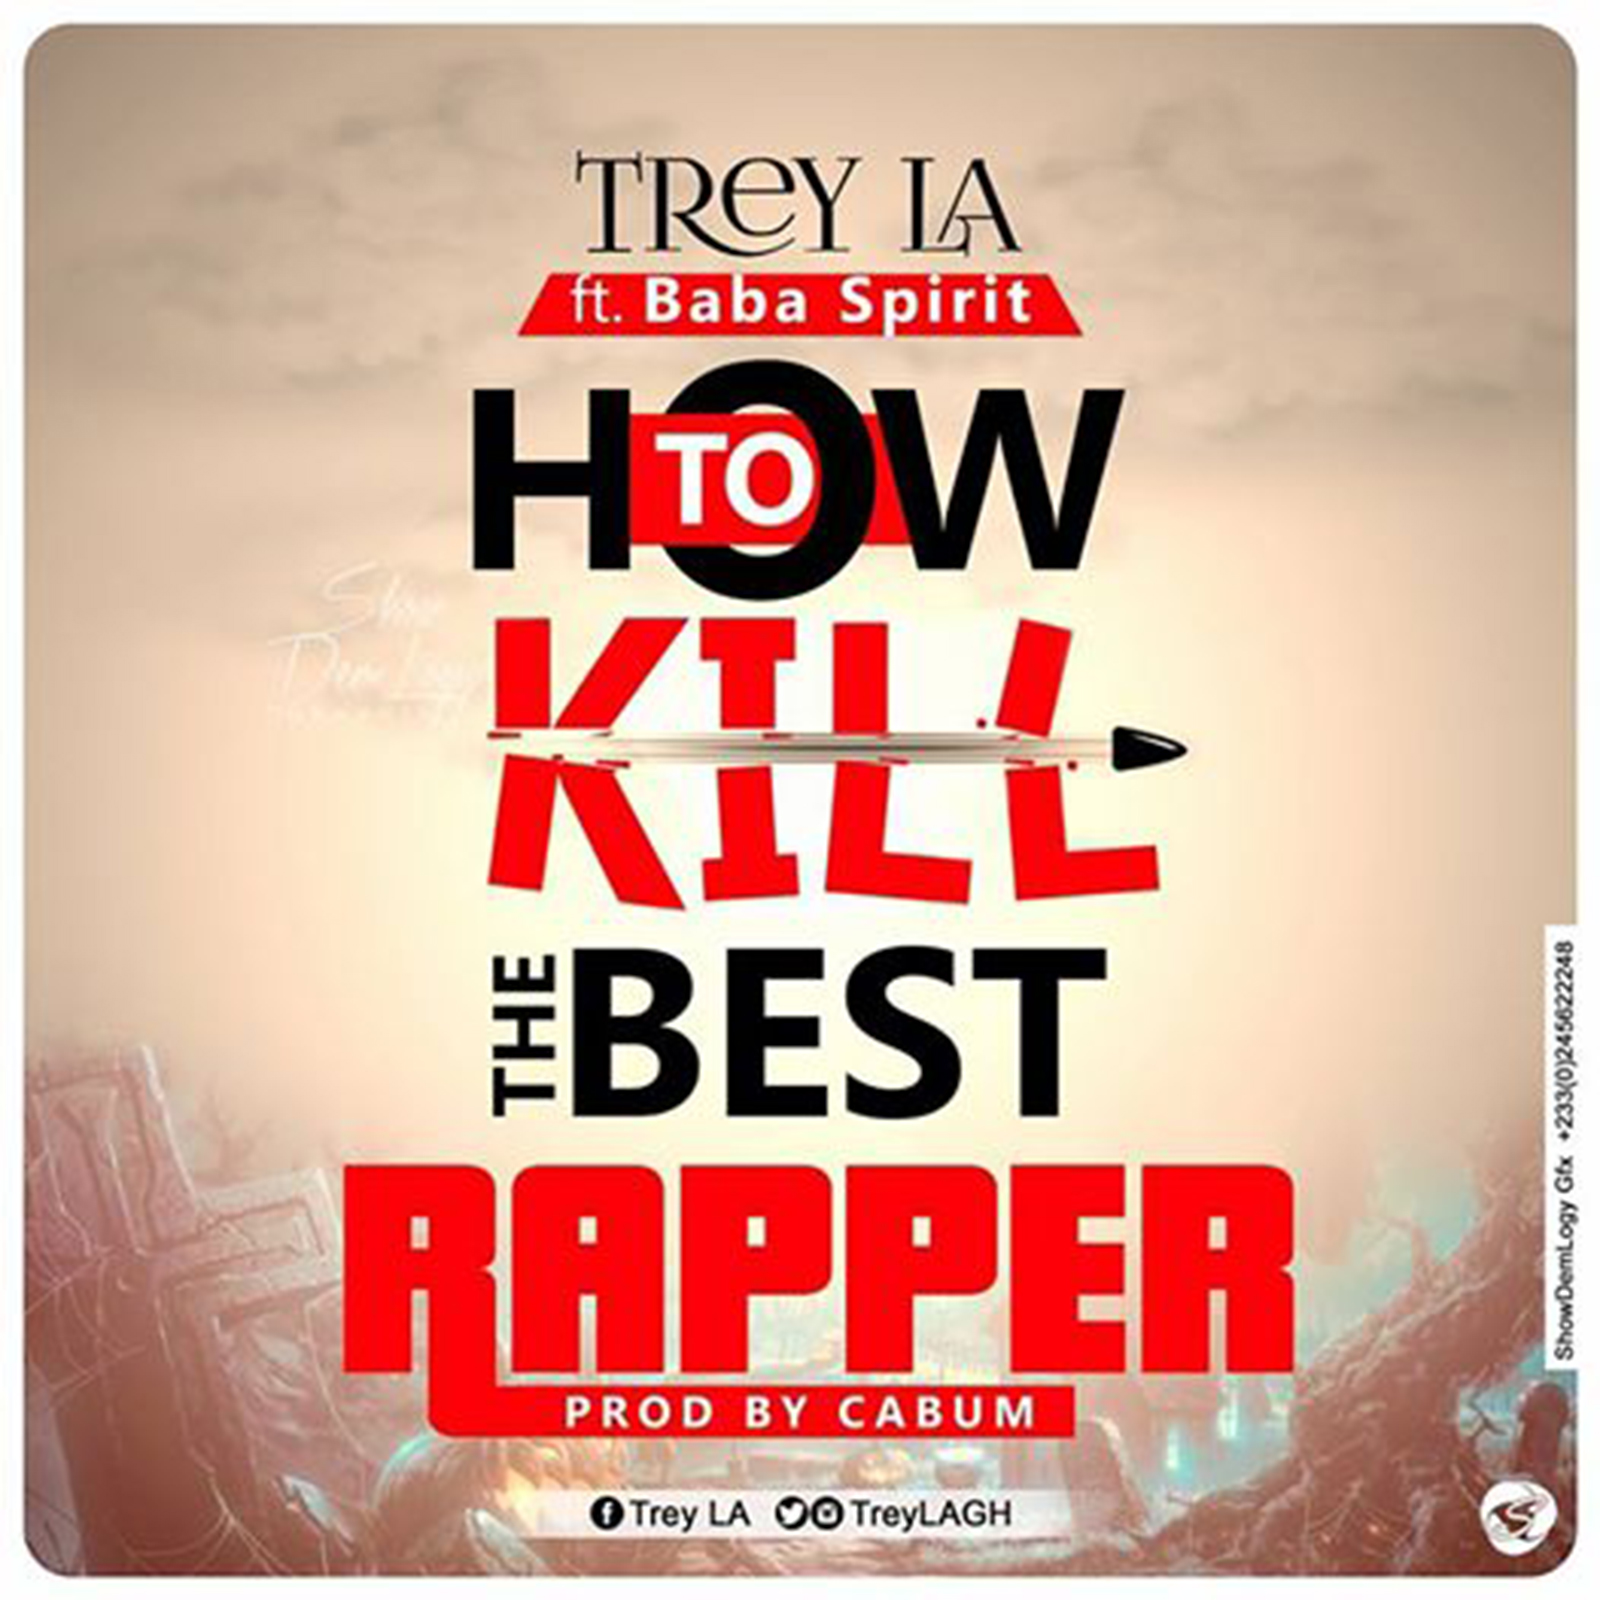 How To Kill The Best Rapper by Trey LA